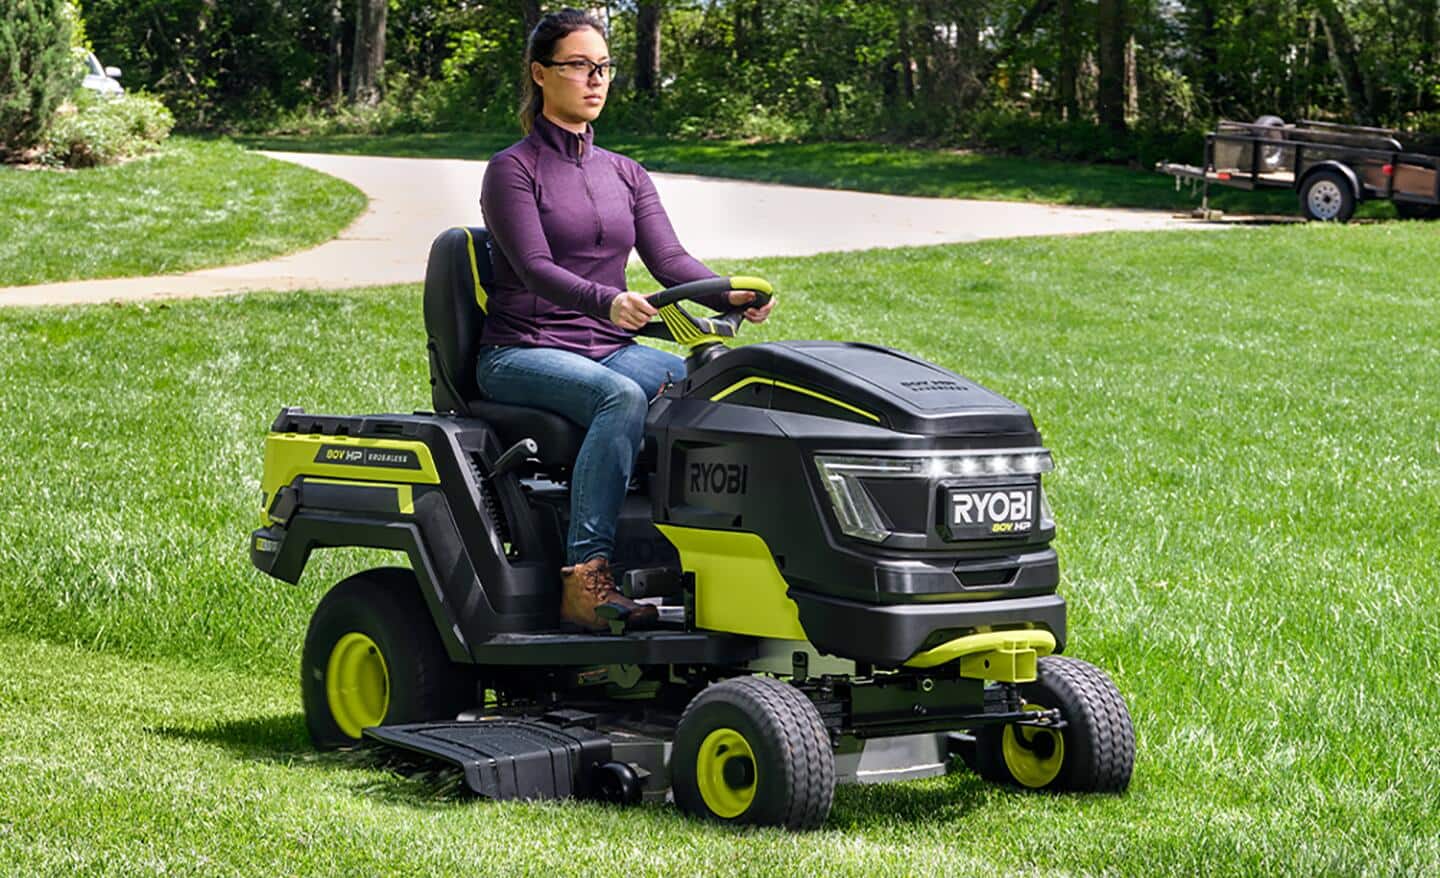 A woman mows grass with a battery powered riding lawn mower.